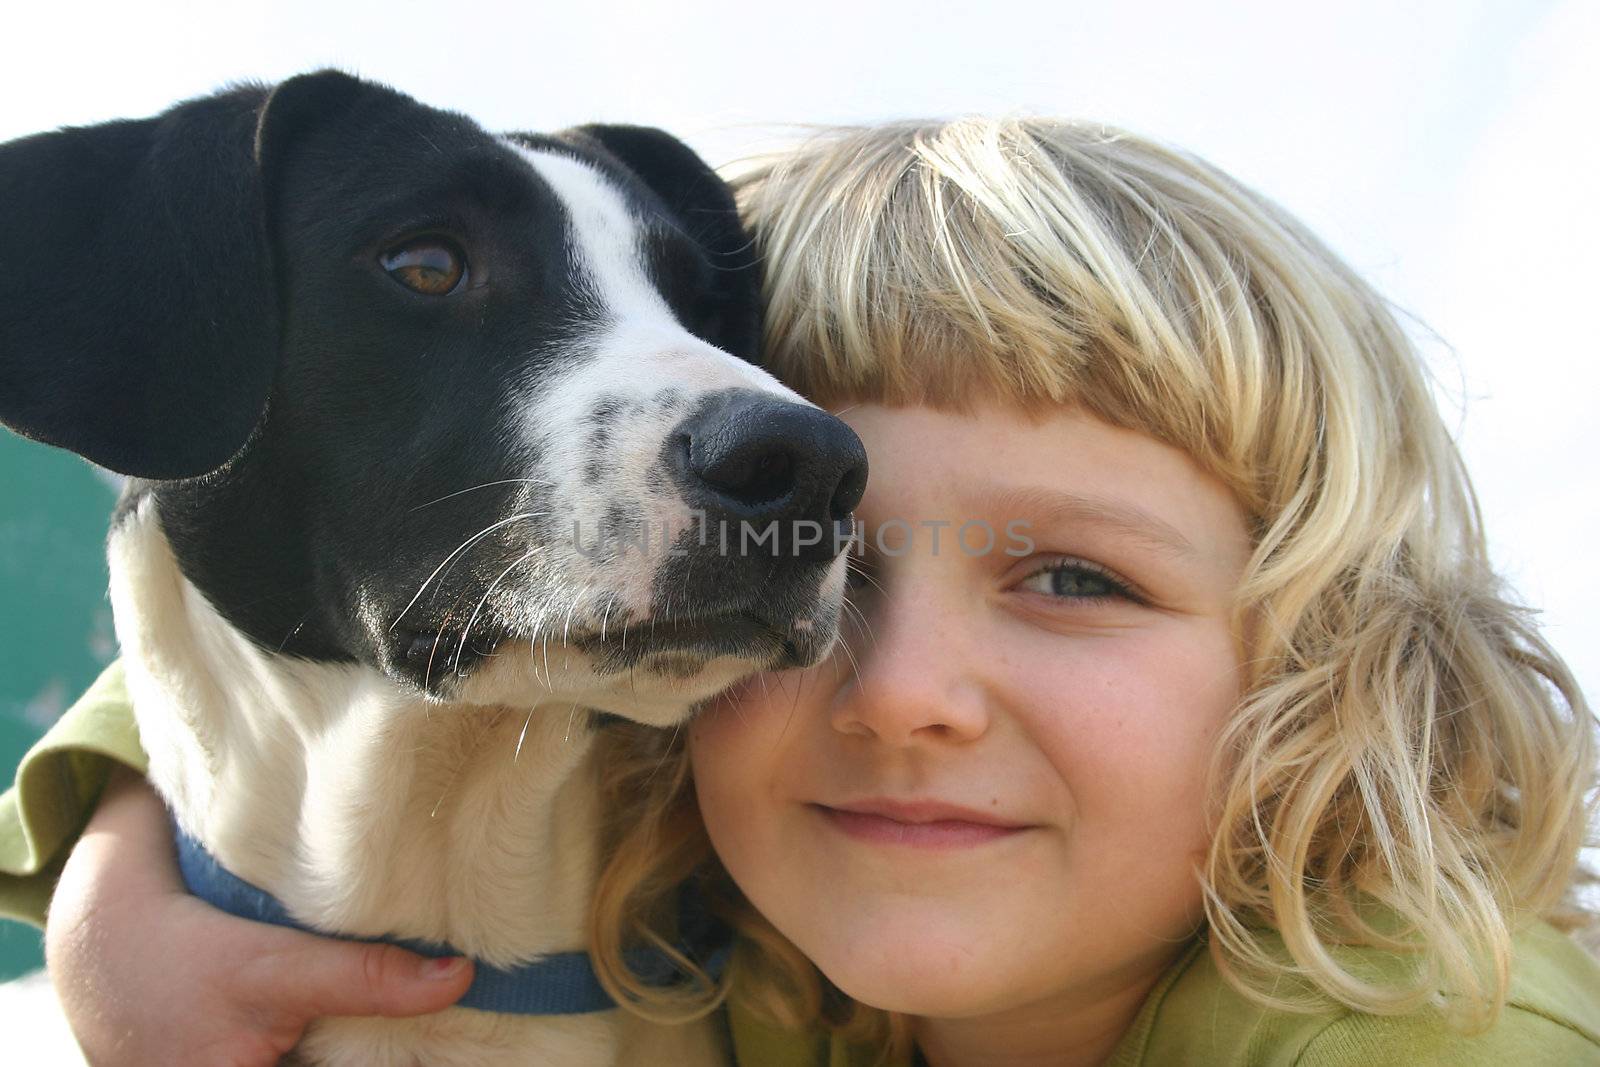 A 6 year old girl is cuddling her dog. Closeup of their faces